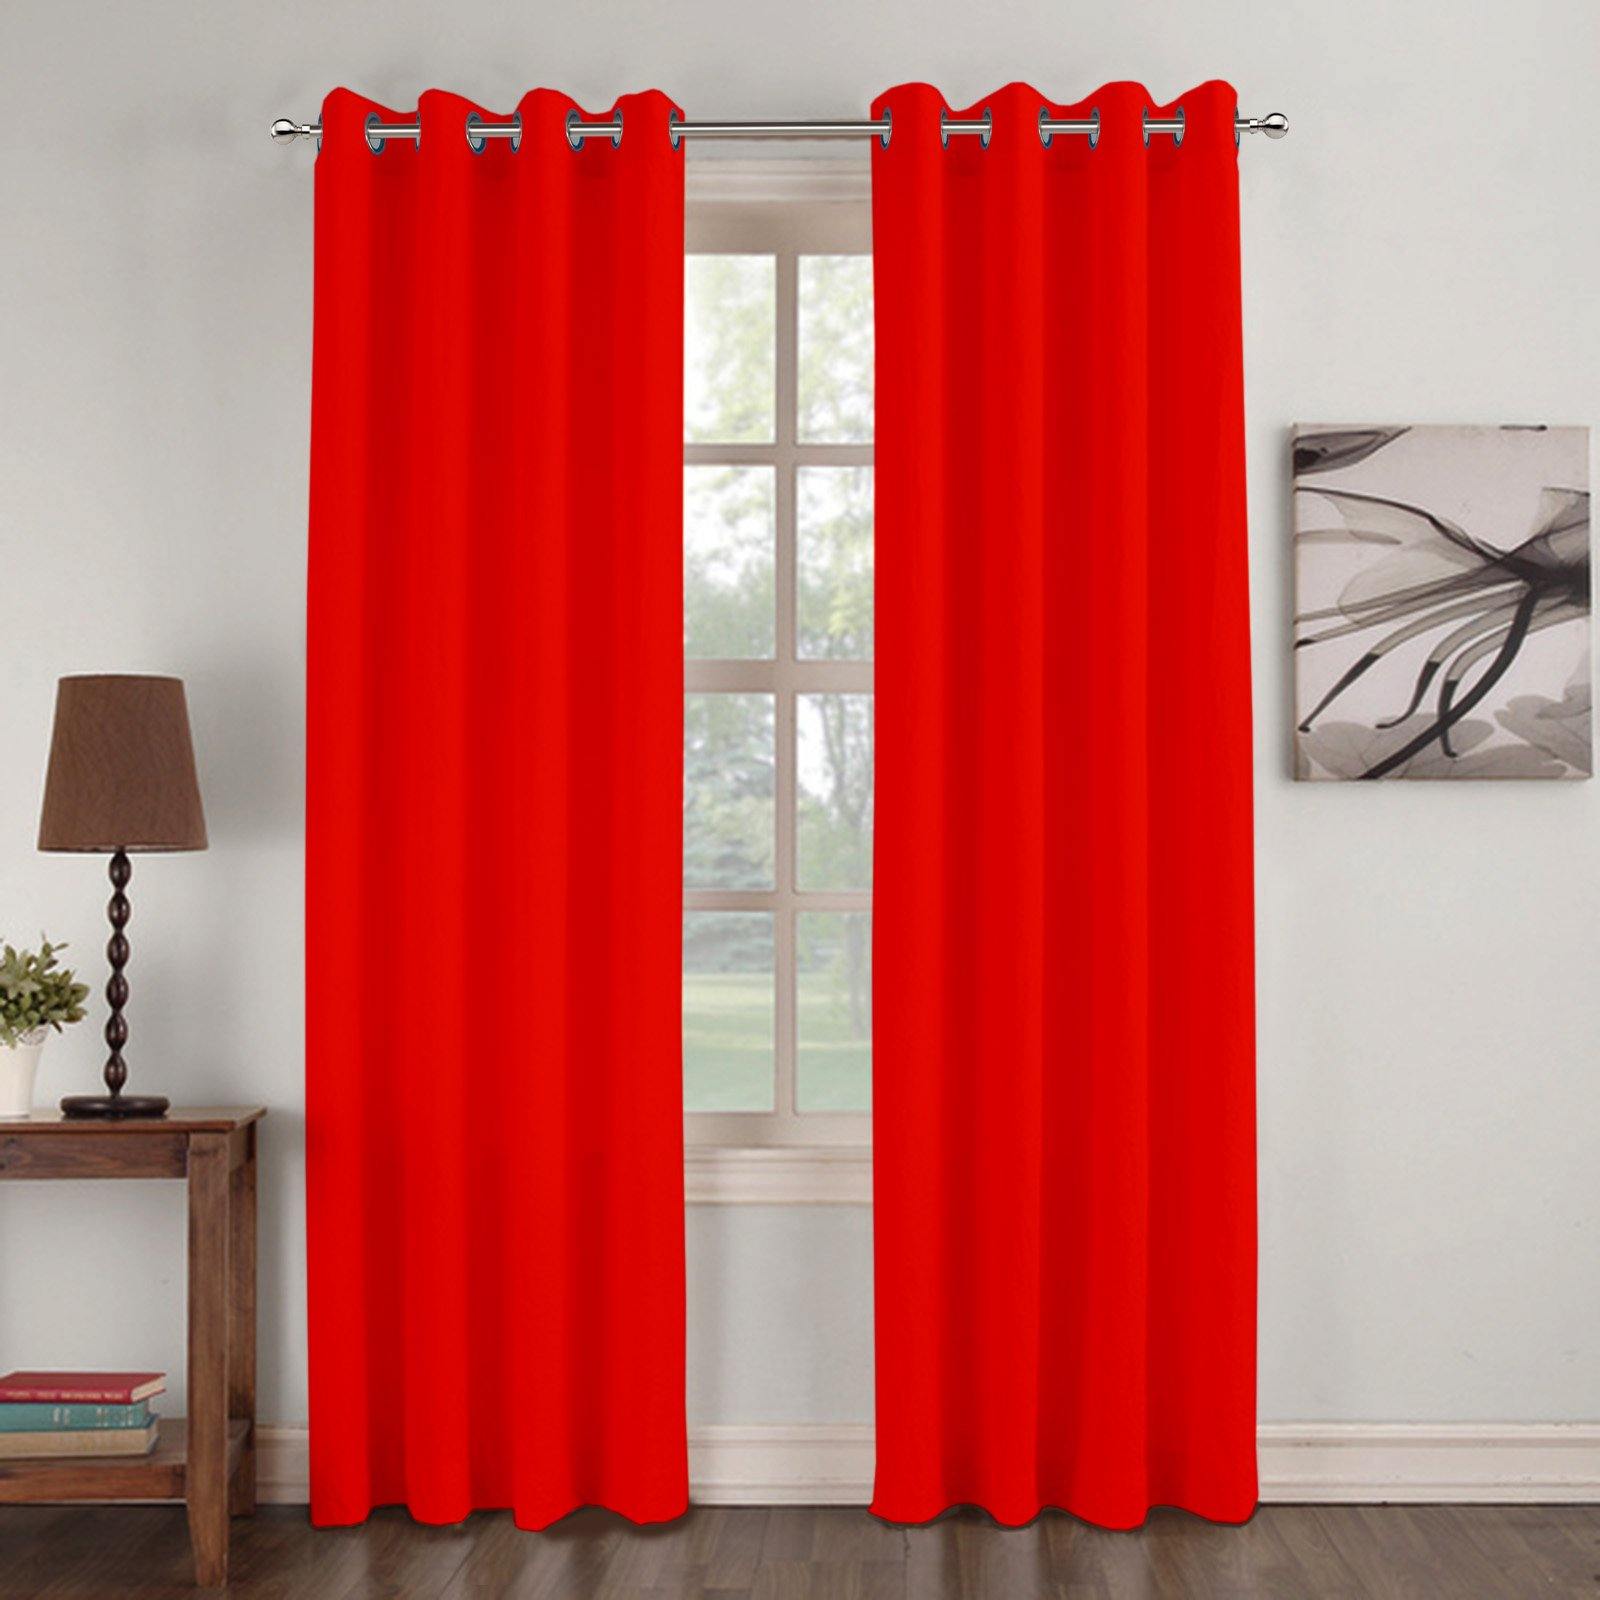 Lushomes Basic Plain Red Microfiber Door Curtains with Smooth Finish (54 x 90 inch or 140 x 230 cms, 2 Pcs) - Lushomes